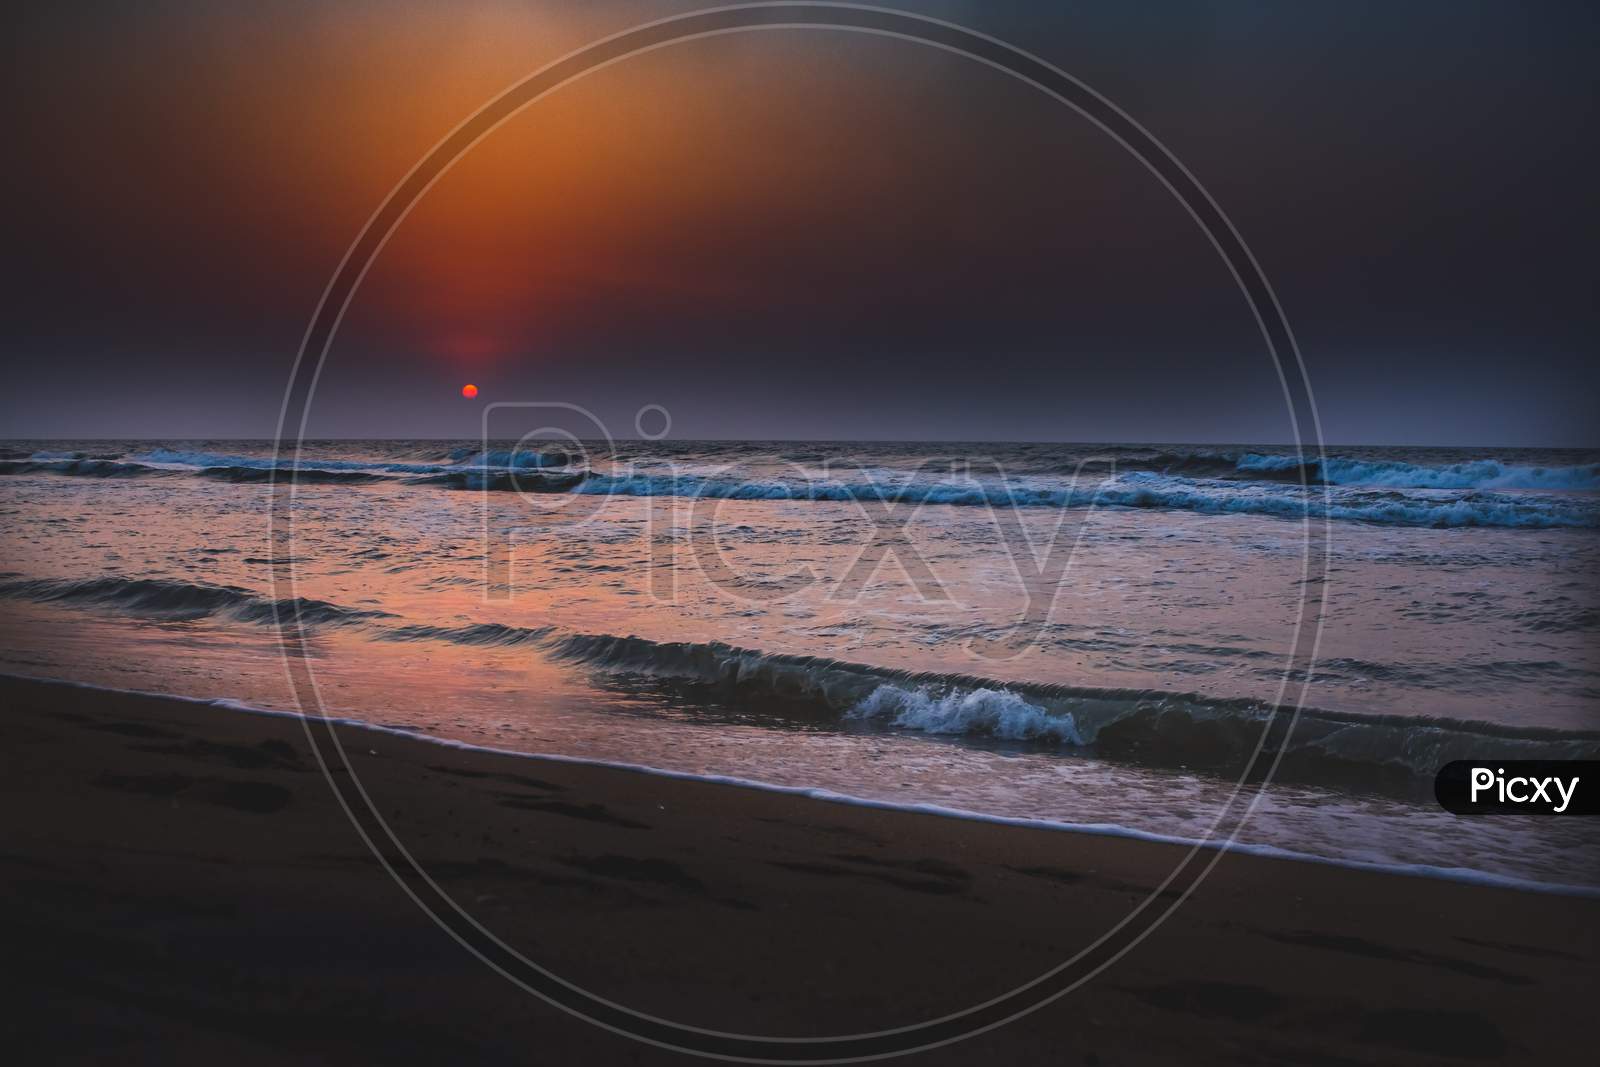 Beautiful Sunrise Over The Beach In Long Exposure. Moving Elements Sunrise And Wave Photography From The Beach In Chennai, India. Red Sky In Bay Of Bengal. Sea Waves Photography. Ecr Beach